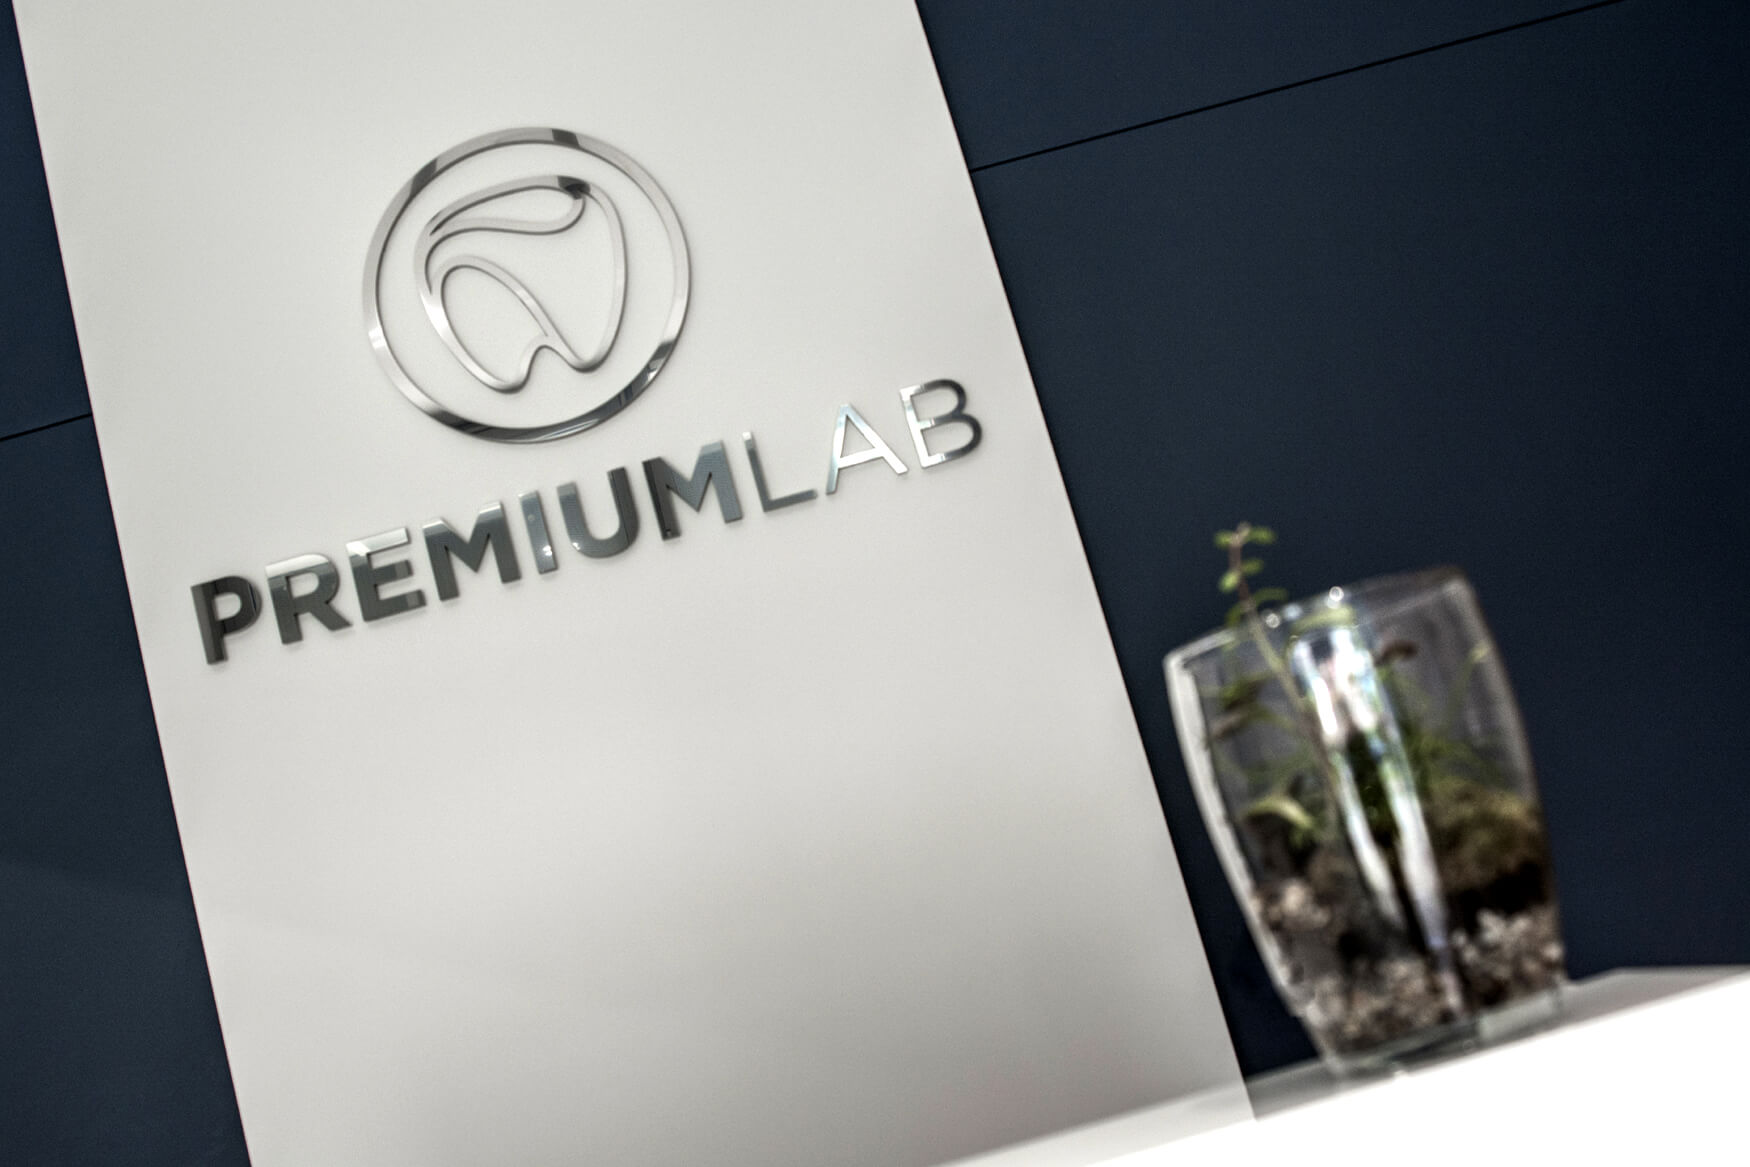 Premiumlab - Premiumlab - logo and 3D letters made of Plexiglas and polished stainless steel sheet placed in the lobby